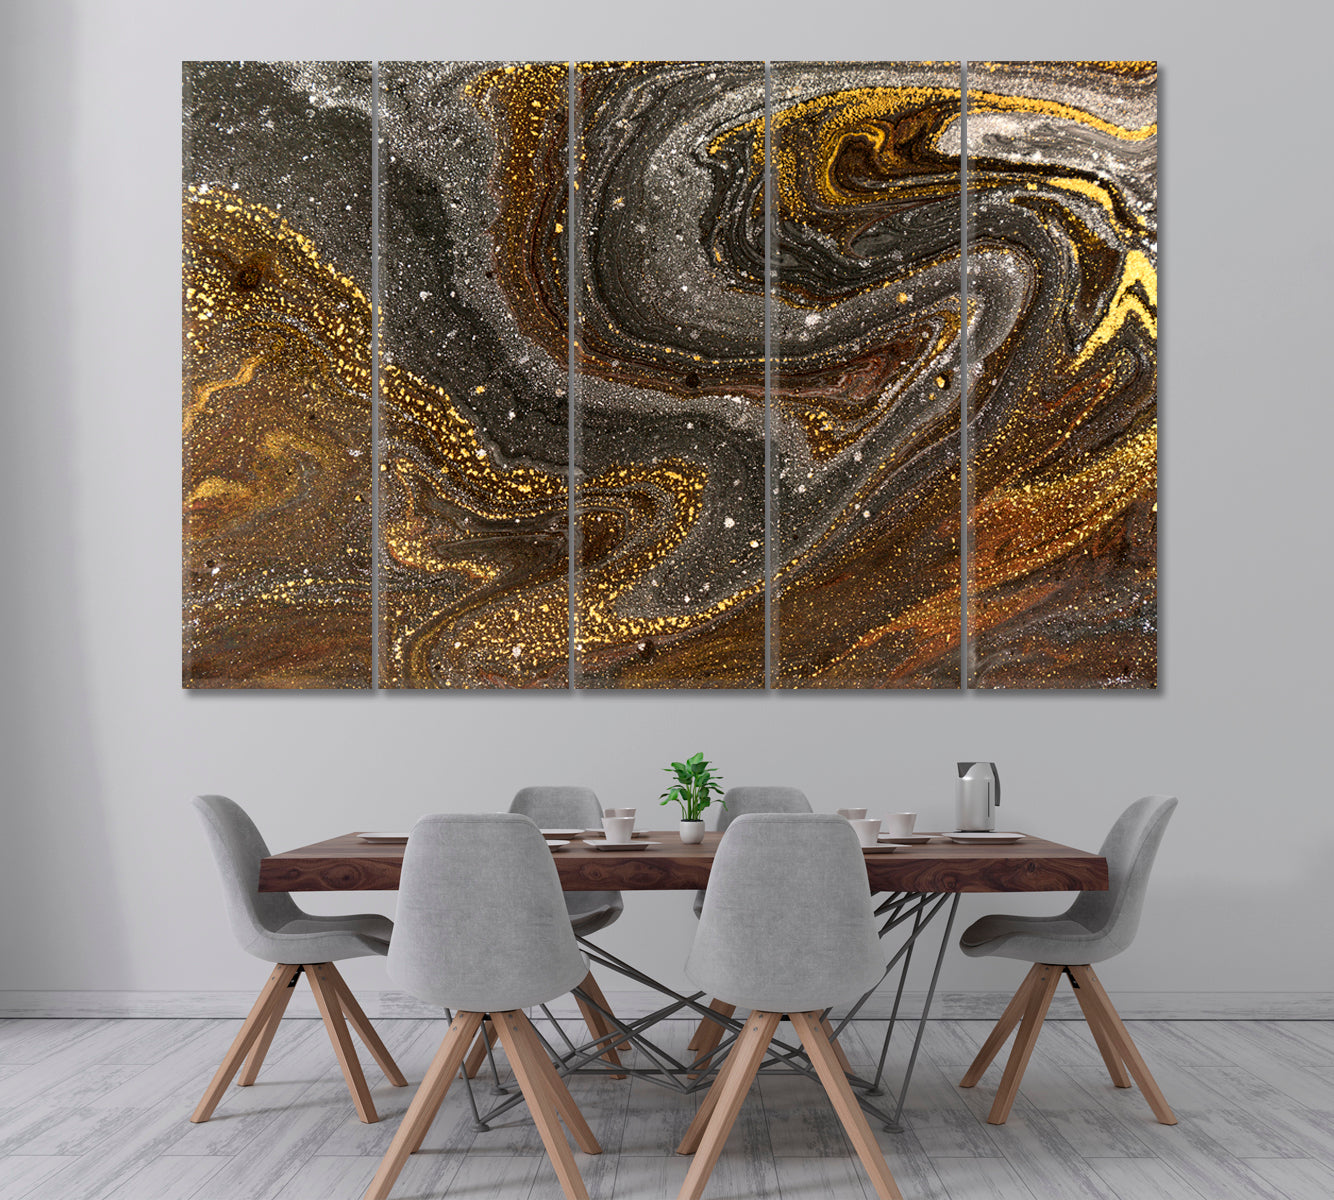 Abstract Marble Mixed Acrylic Paints Canvas Print ArtLexy 5 Panels 36"x24" inches 